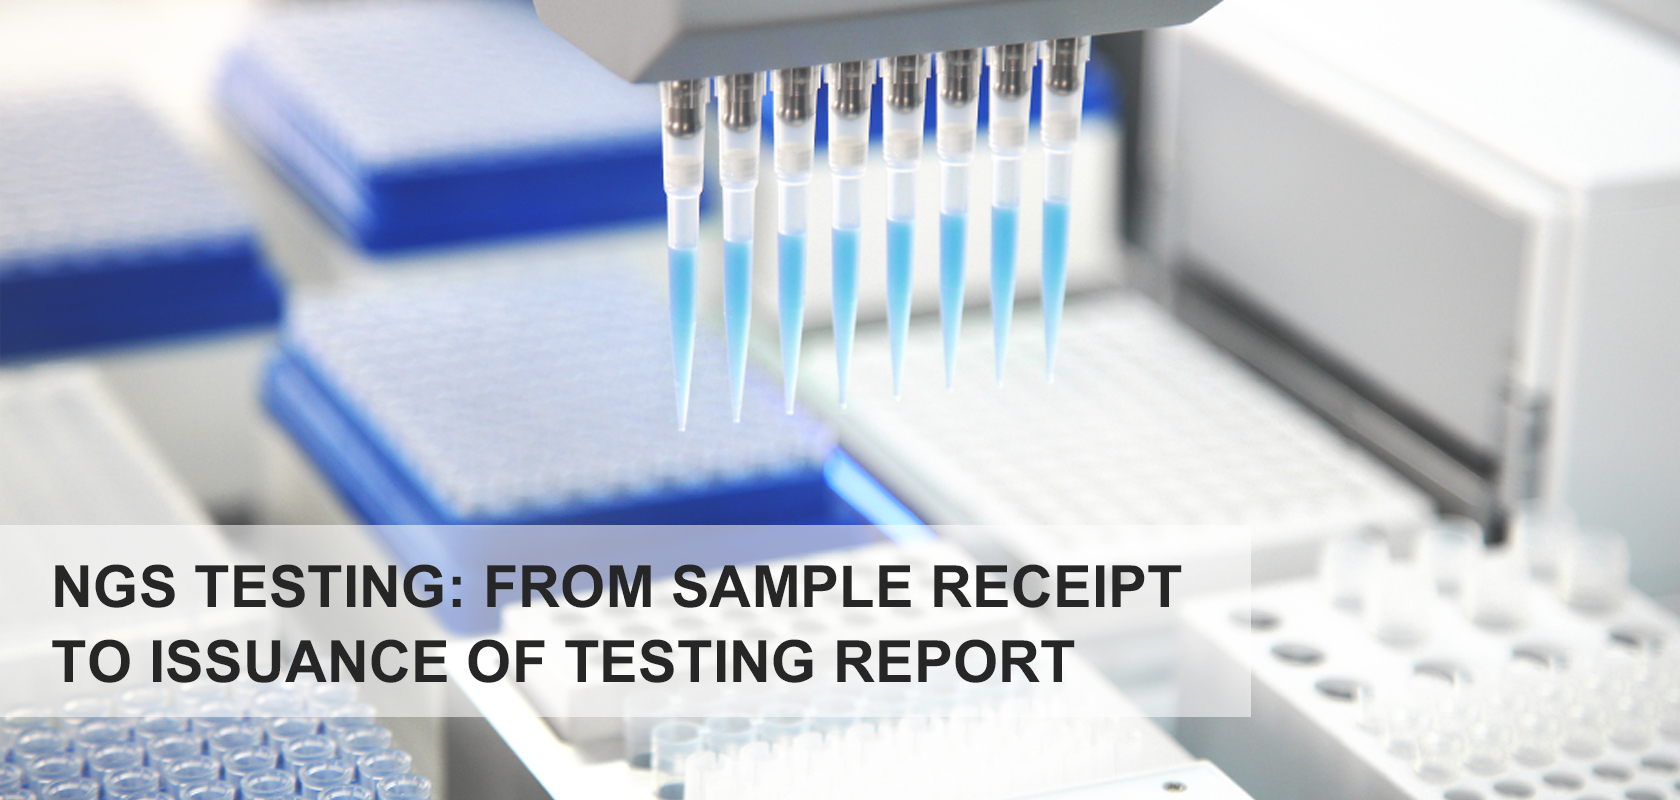 NGS Testing: From Sample Receipt to Issuance of Testing Report